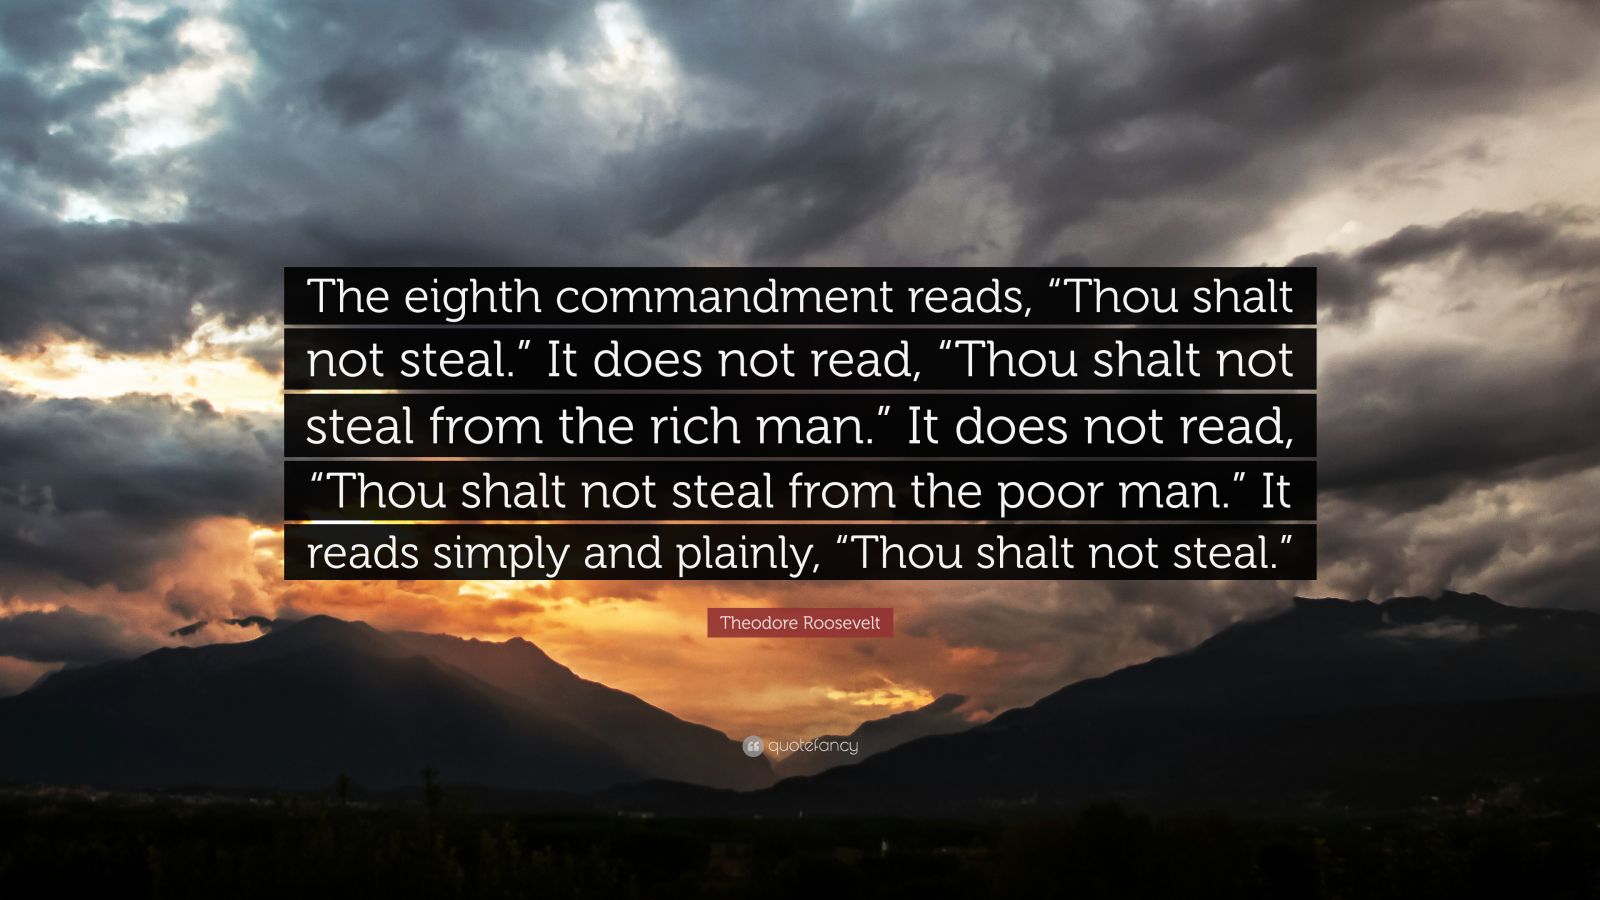 Theodore Roosevelt Quote: “The eighth commandment reads, “Thou shalt